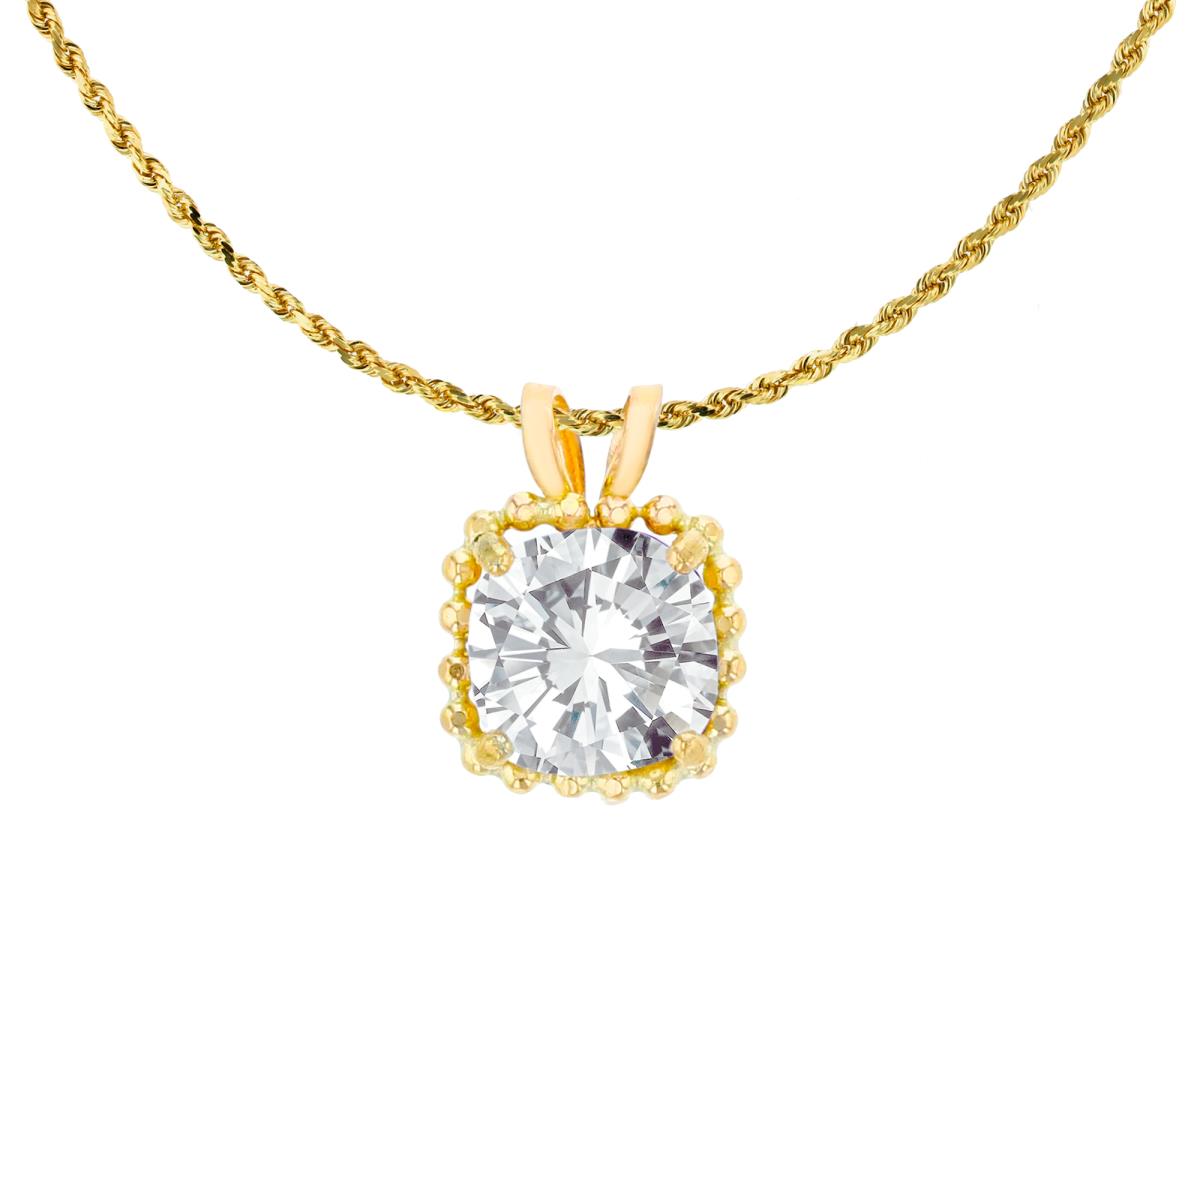 10K Yellow Gold 6mm Cushion Cut White Topaz Bead Frame Rabbit Ear 18" Rope Chain Necklace